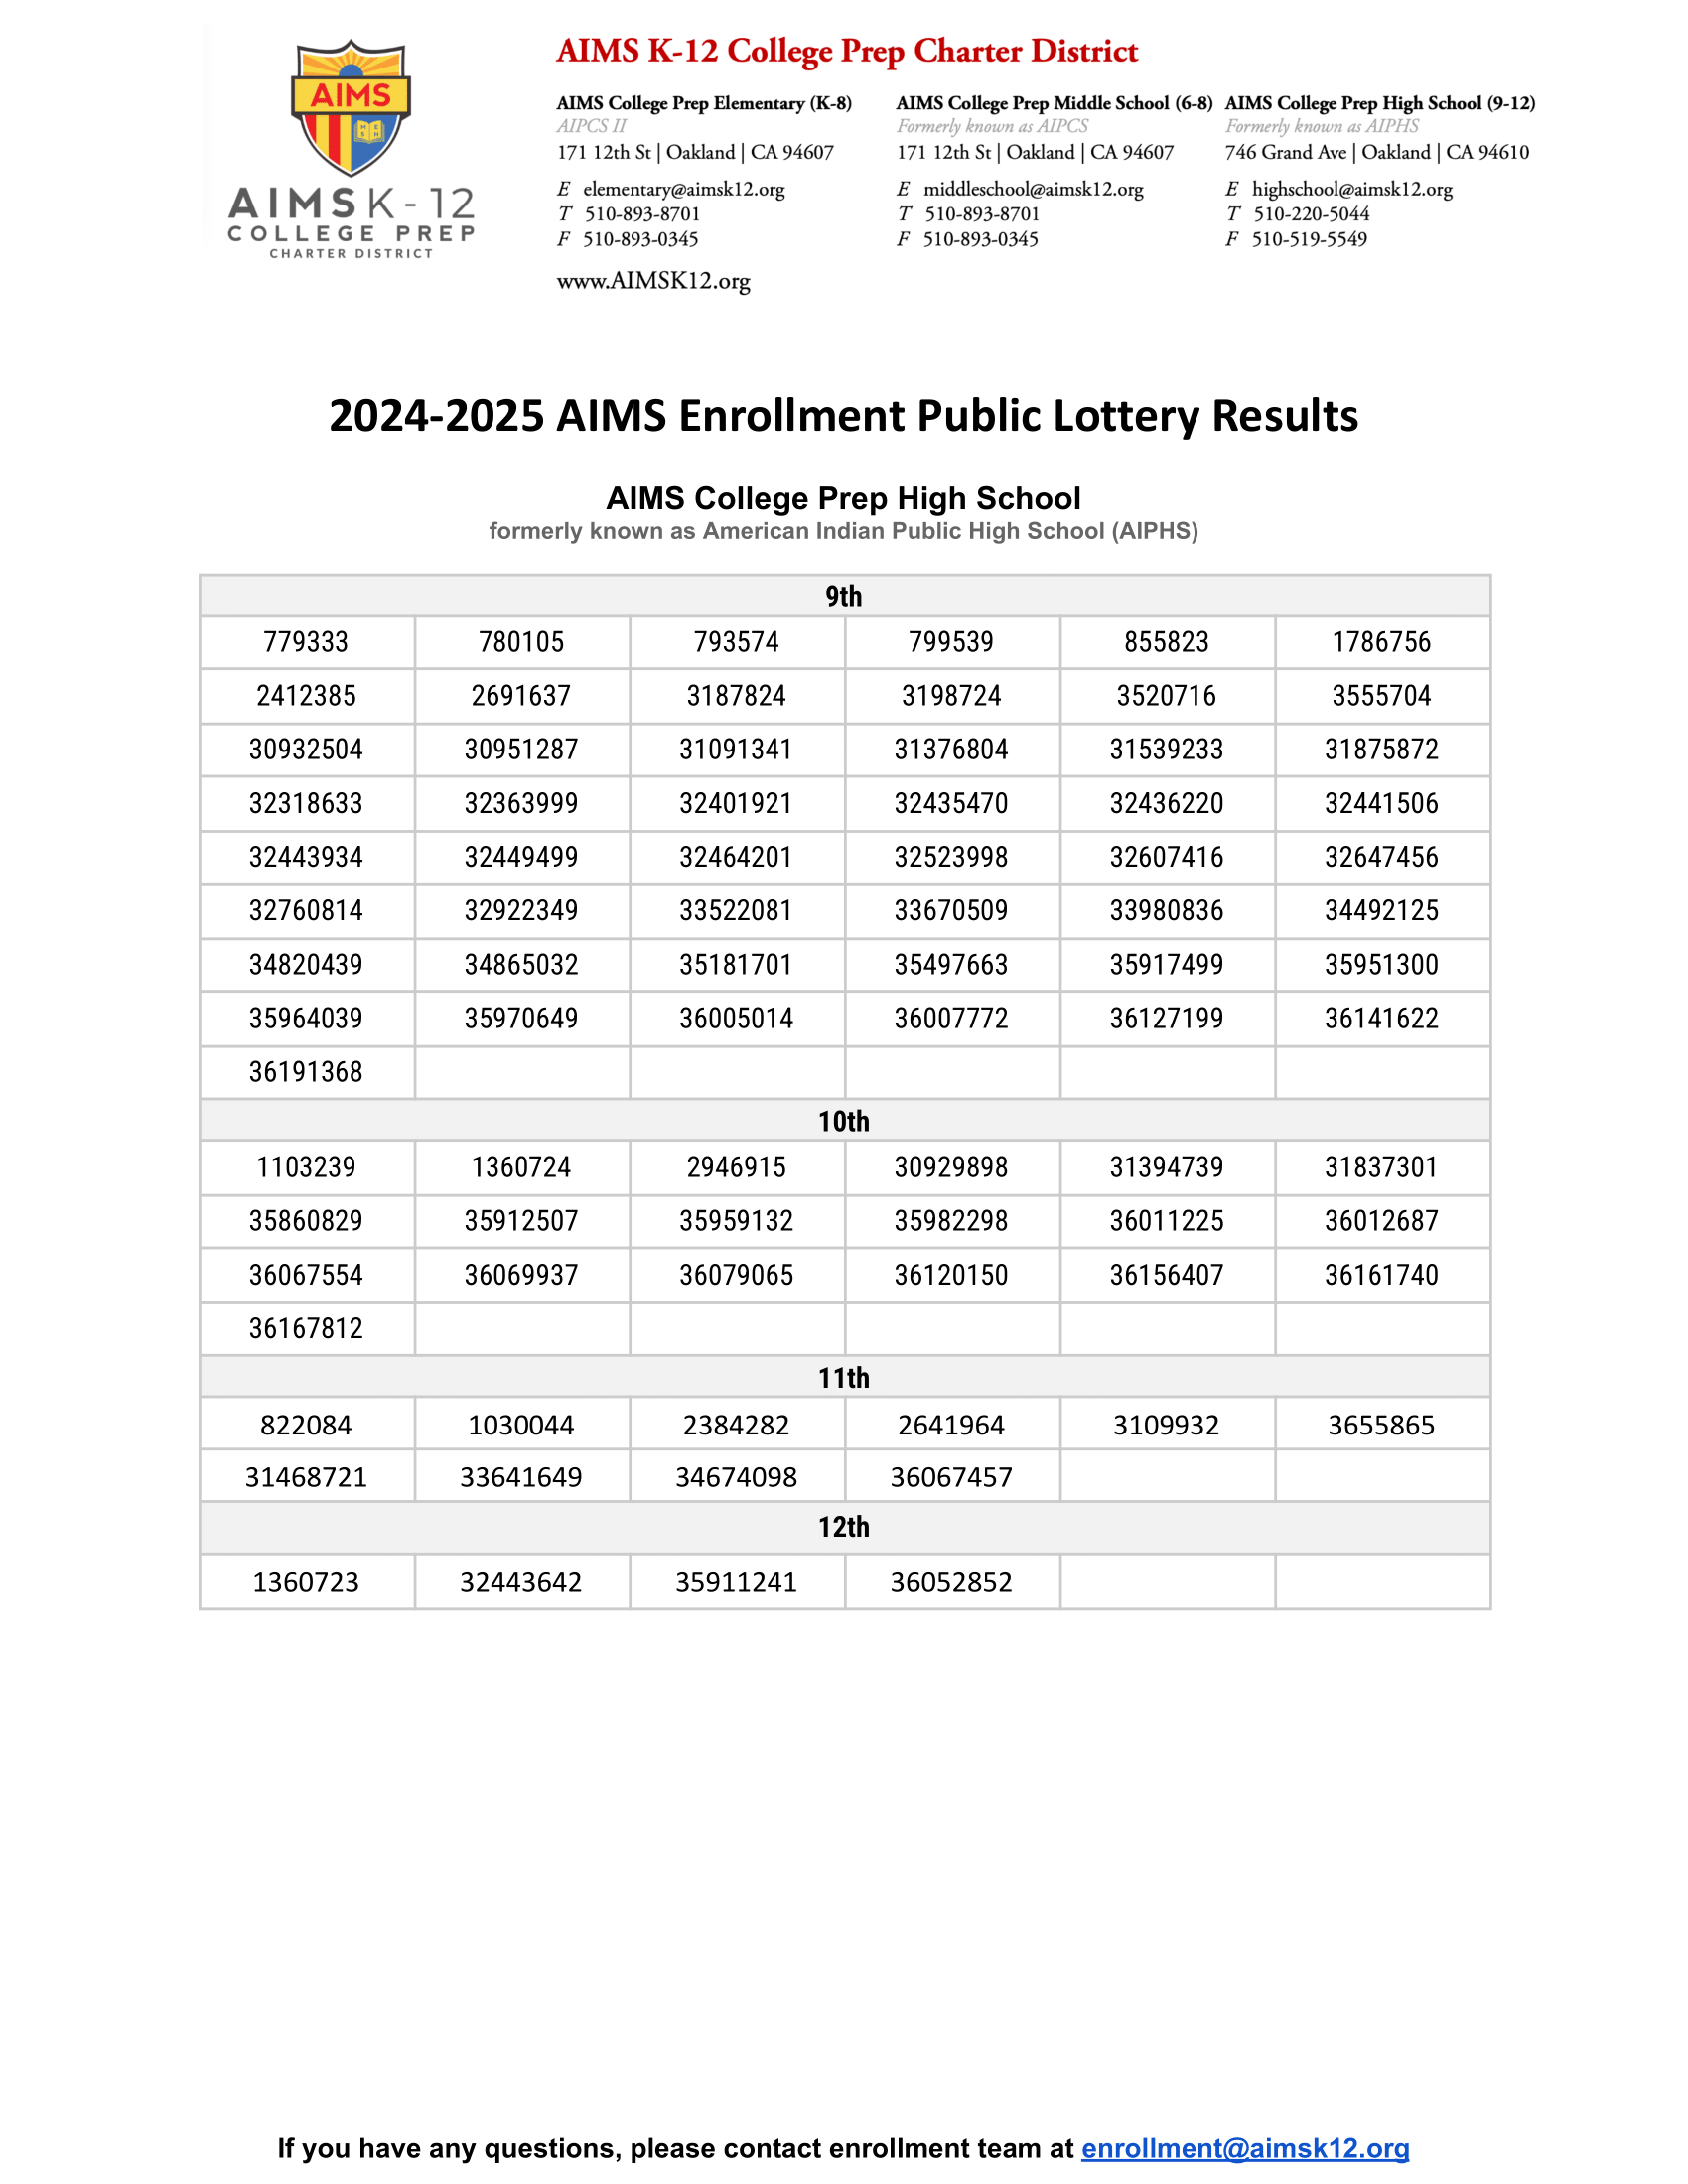 _2024-2025 AIMS Enrollment Public Lottery Results-3.png